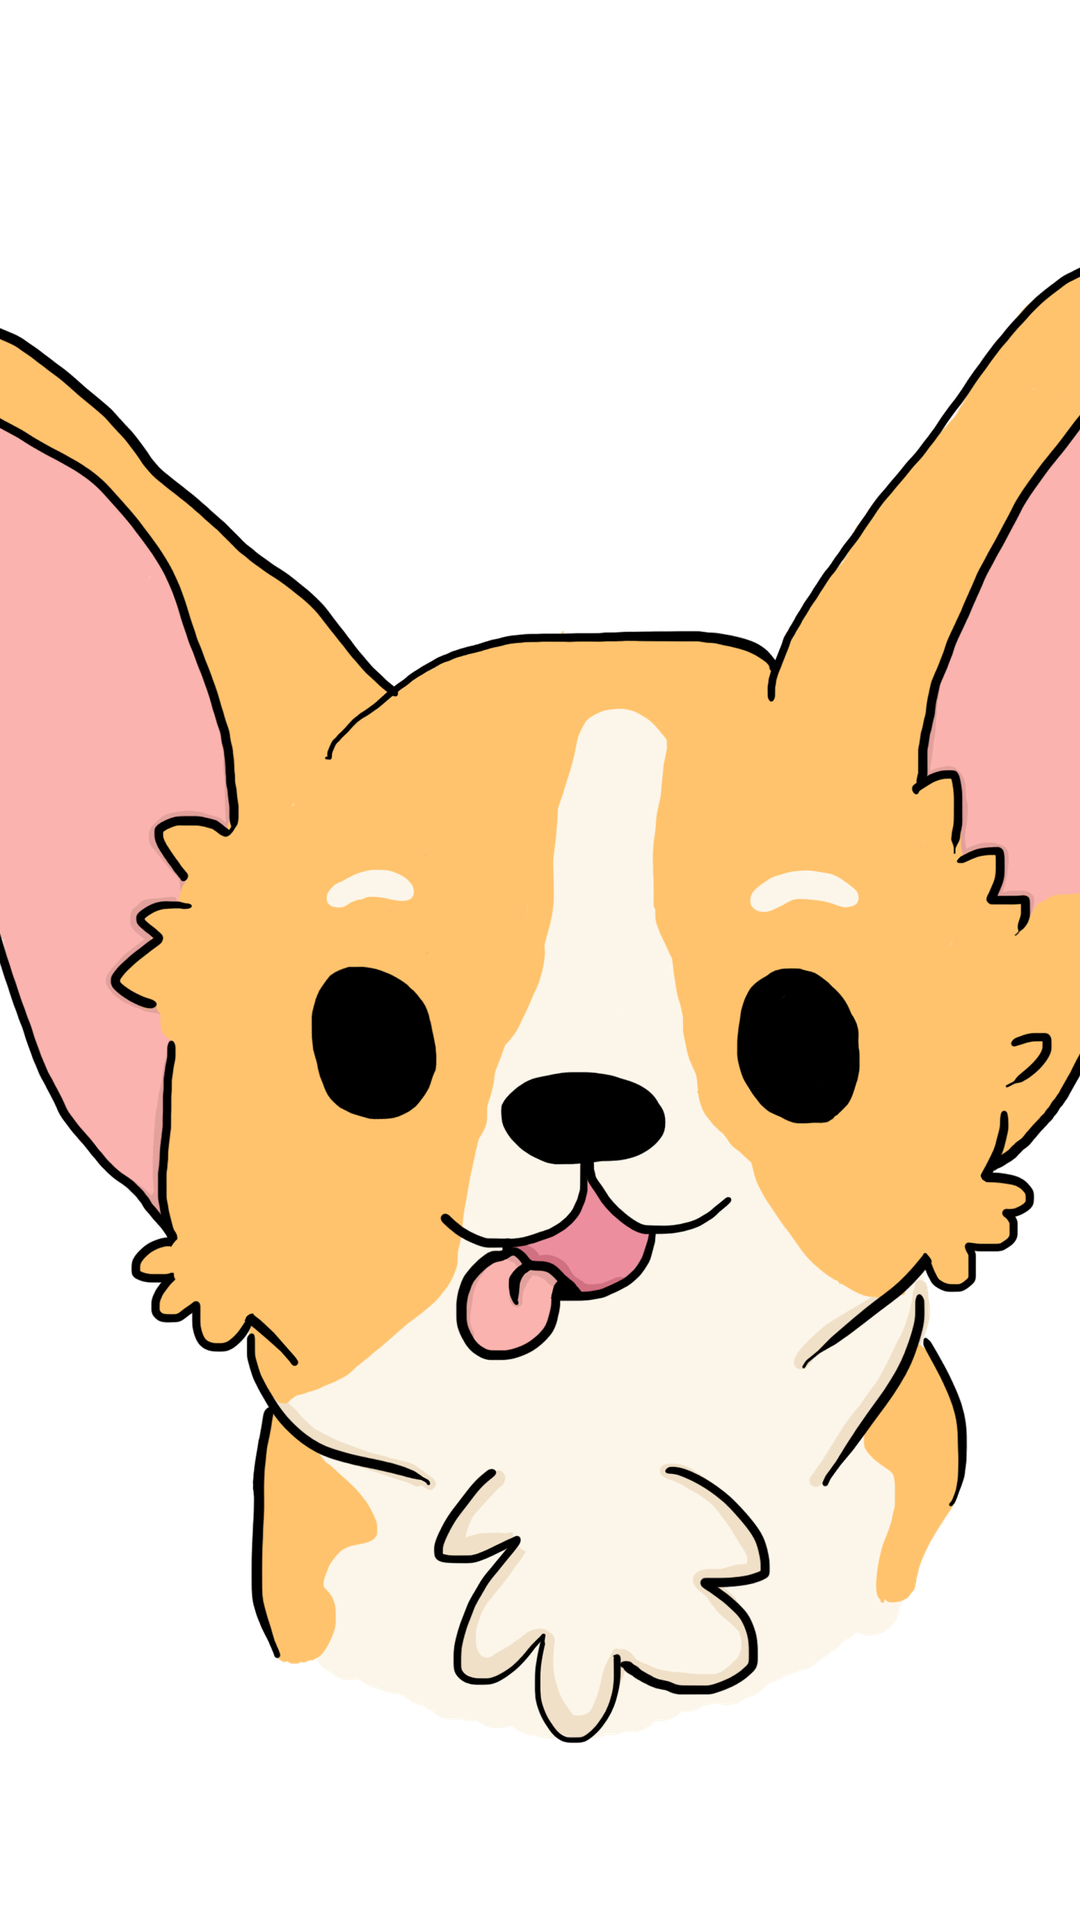 Anime Persocom Guy  Cute Dog Girl Anime  Free Transparent PNG Download   PNGkey